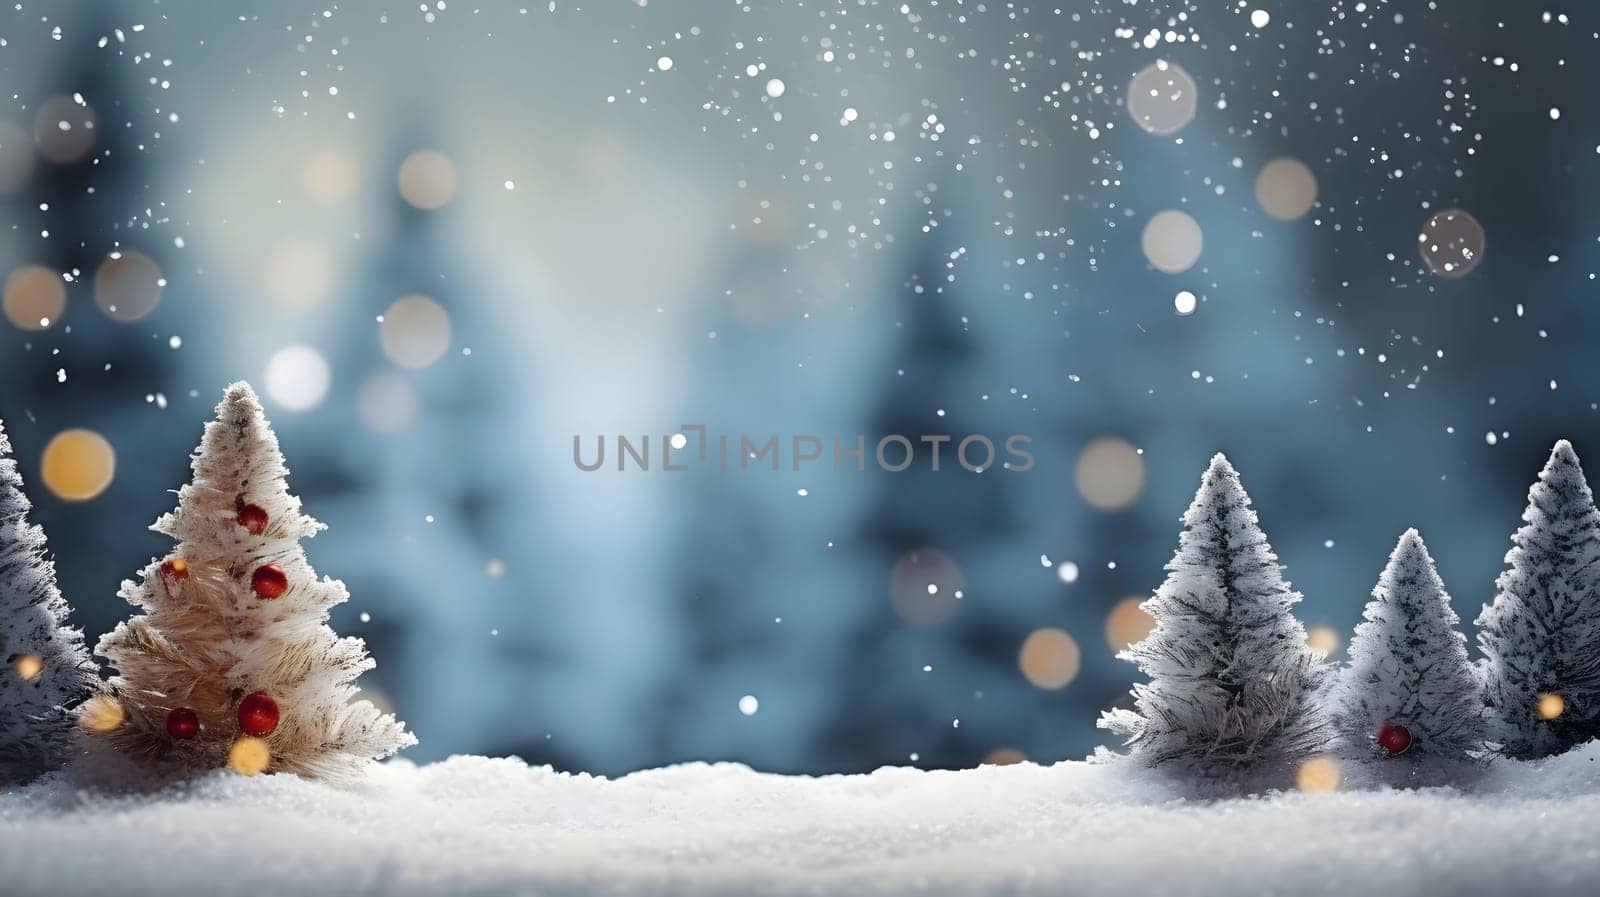 Small white Christmas trees on snow. In the background light bokeh effect and falling snow, smudged winter pine forest. Side view.Christmas banner with space for your own content. by ThemesS